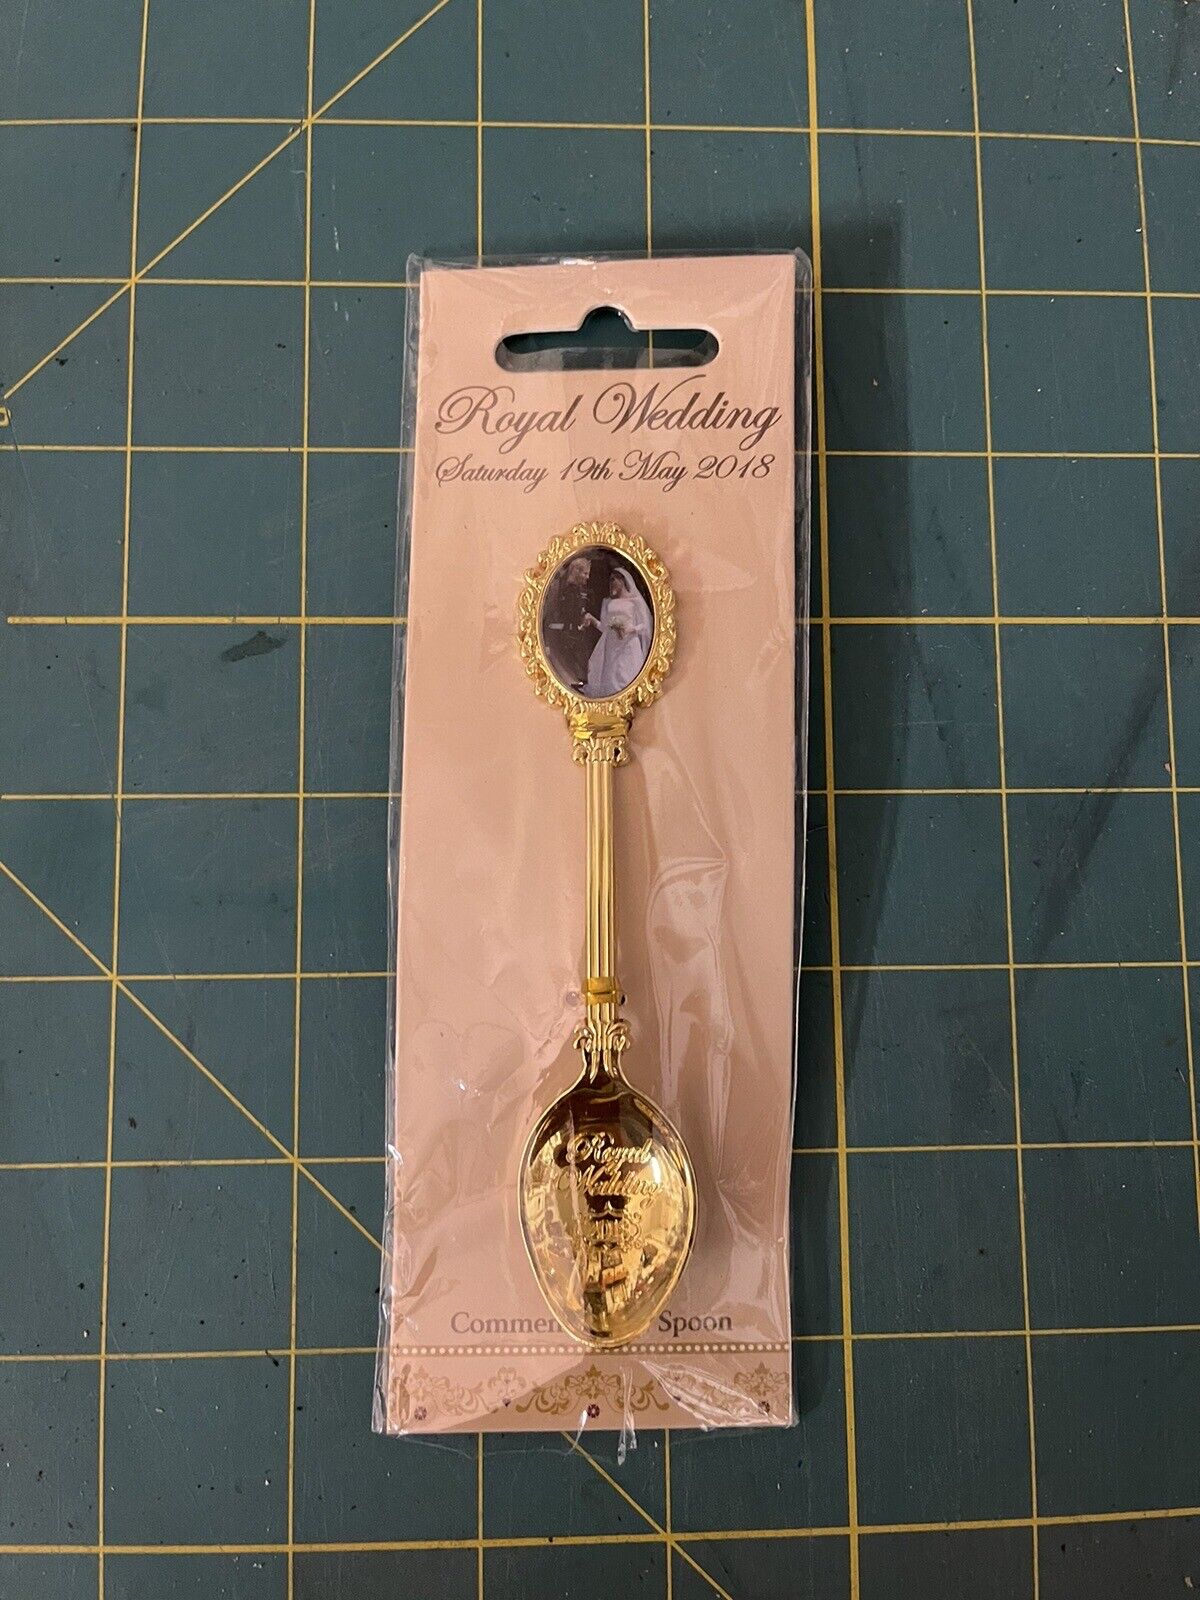 Prince Harry And Meghan Markle Royal Wedding Commemorative Spoon May 2018 Gold